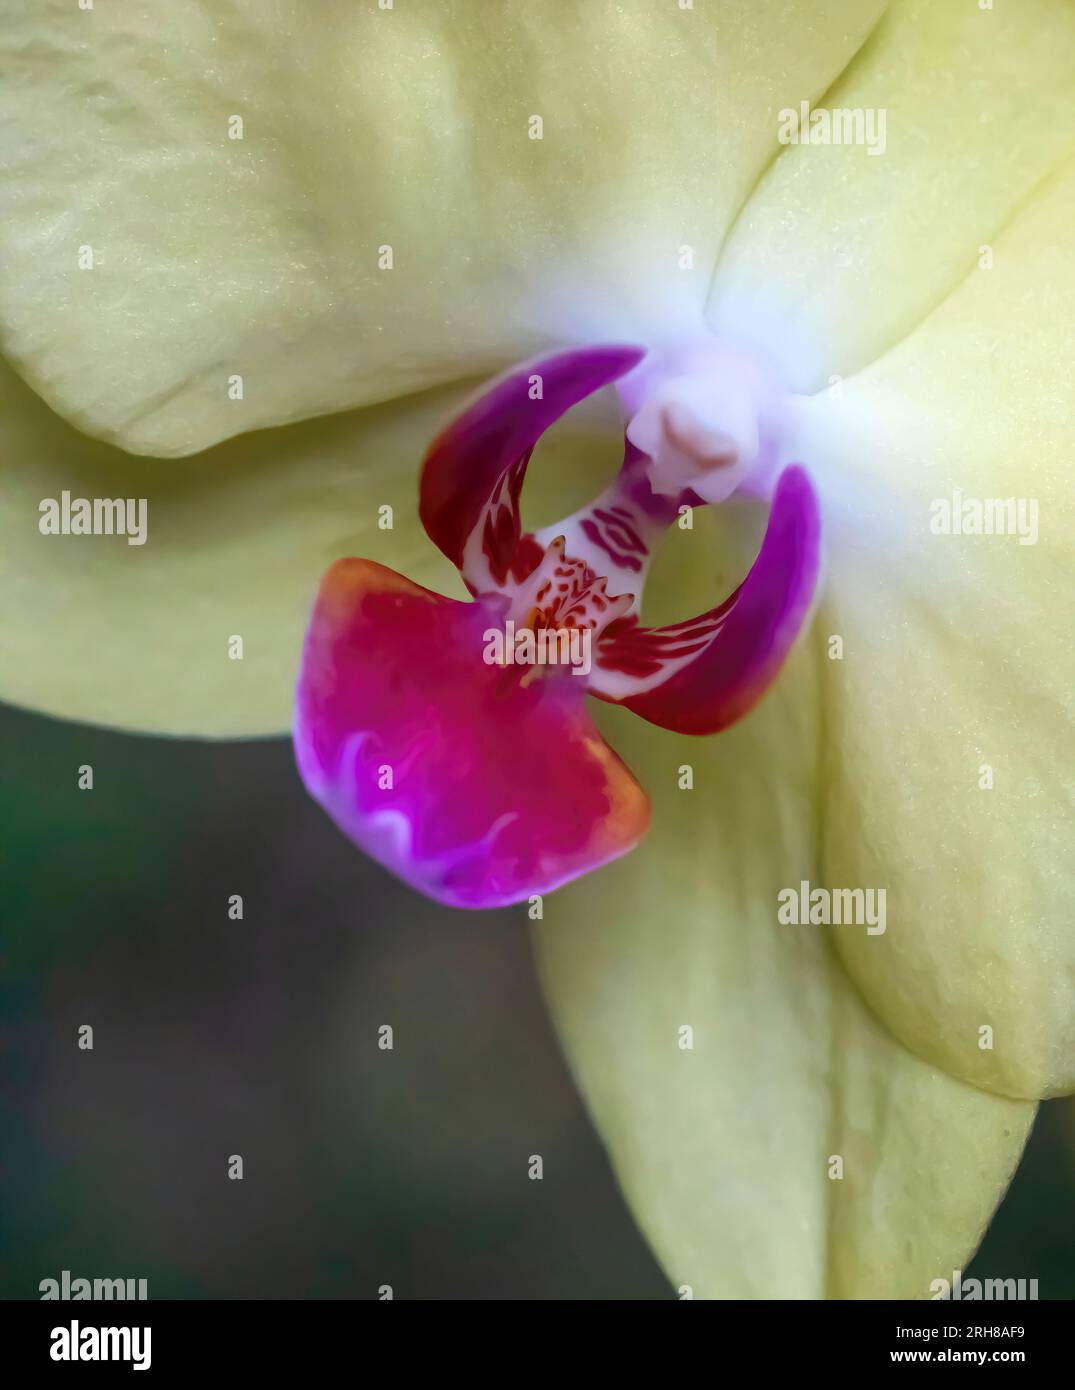 Closeup of an beautiful orchid blossom with yellow sepals and a pink labellum and white anther cap on a summer morning in Taylors Falls, Minnesota USA. Stock Photo